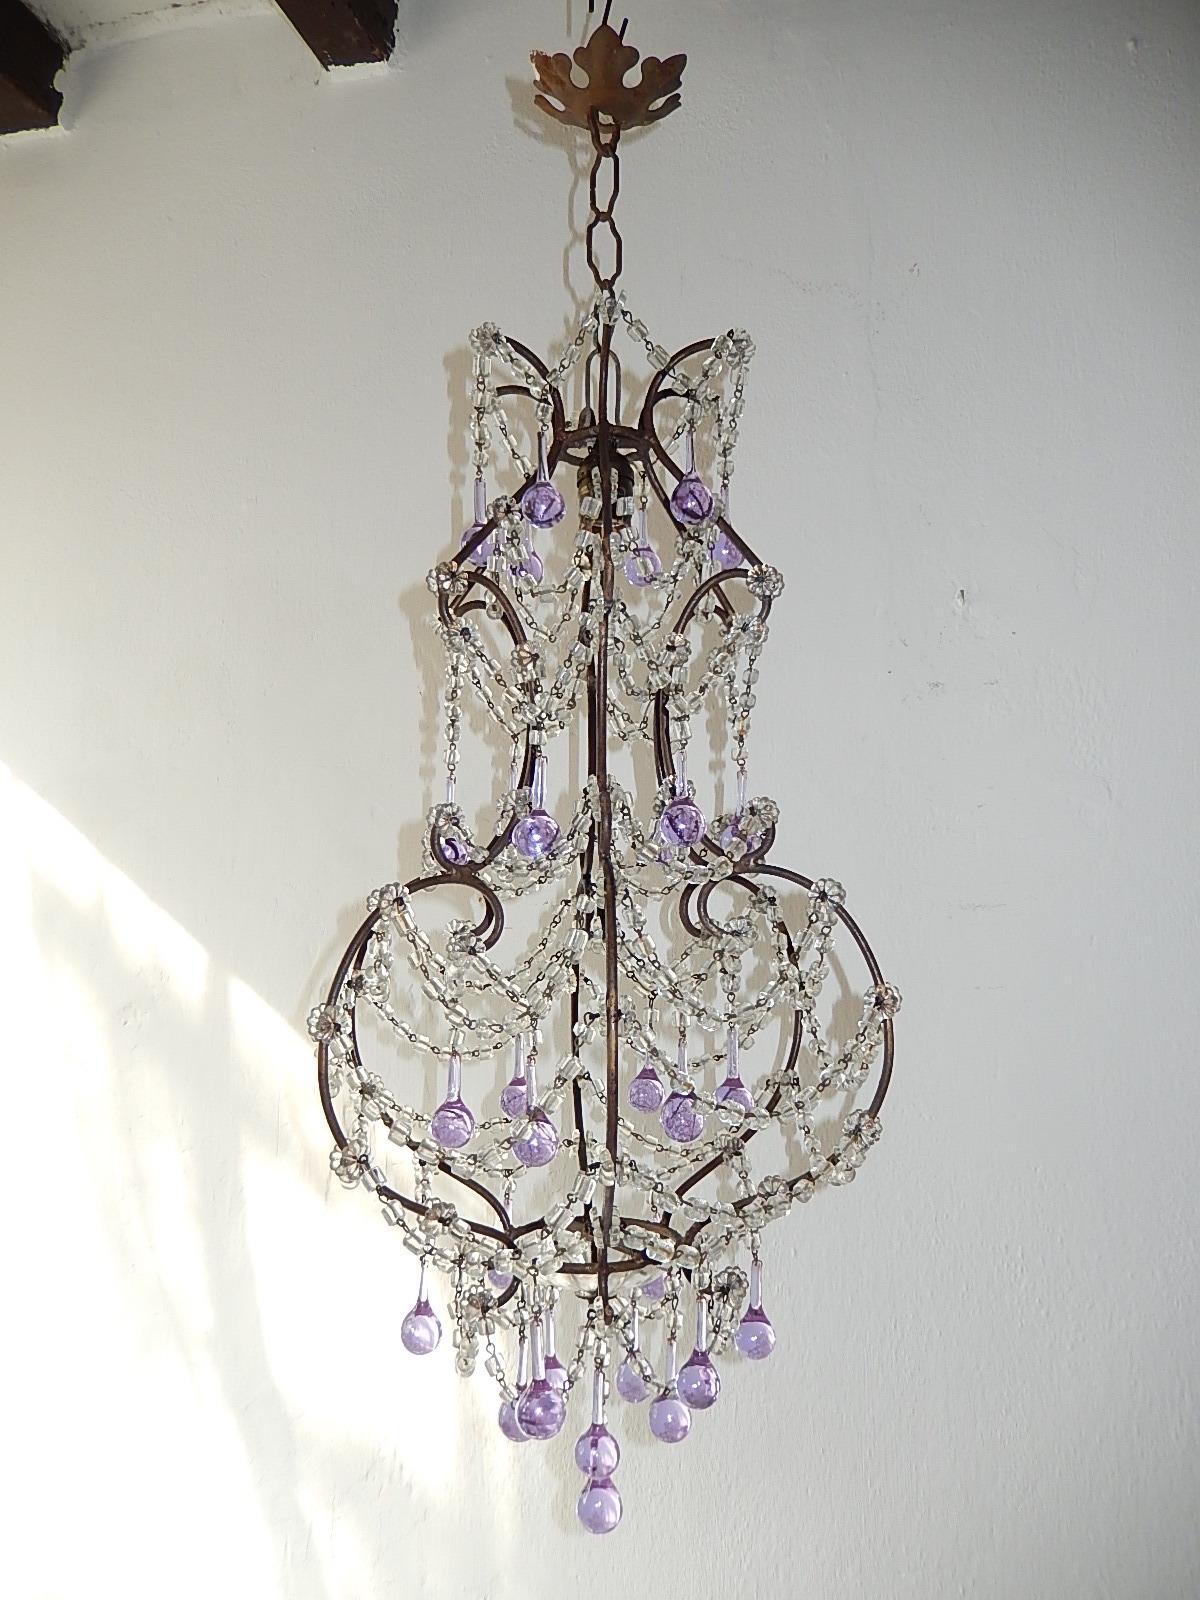 Housing one-light center top. Rewired and ready to hang. Gold gilt metal scroll body with florets throughout. Swags and swags of macaroni beads. Adorning rare Murano vintage lavender drops. Crystal bobeches on bottom. Adding another 8 inches of